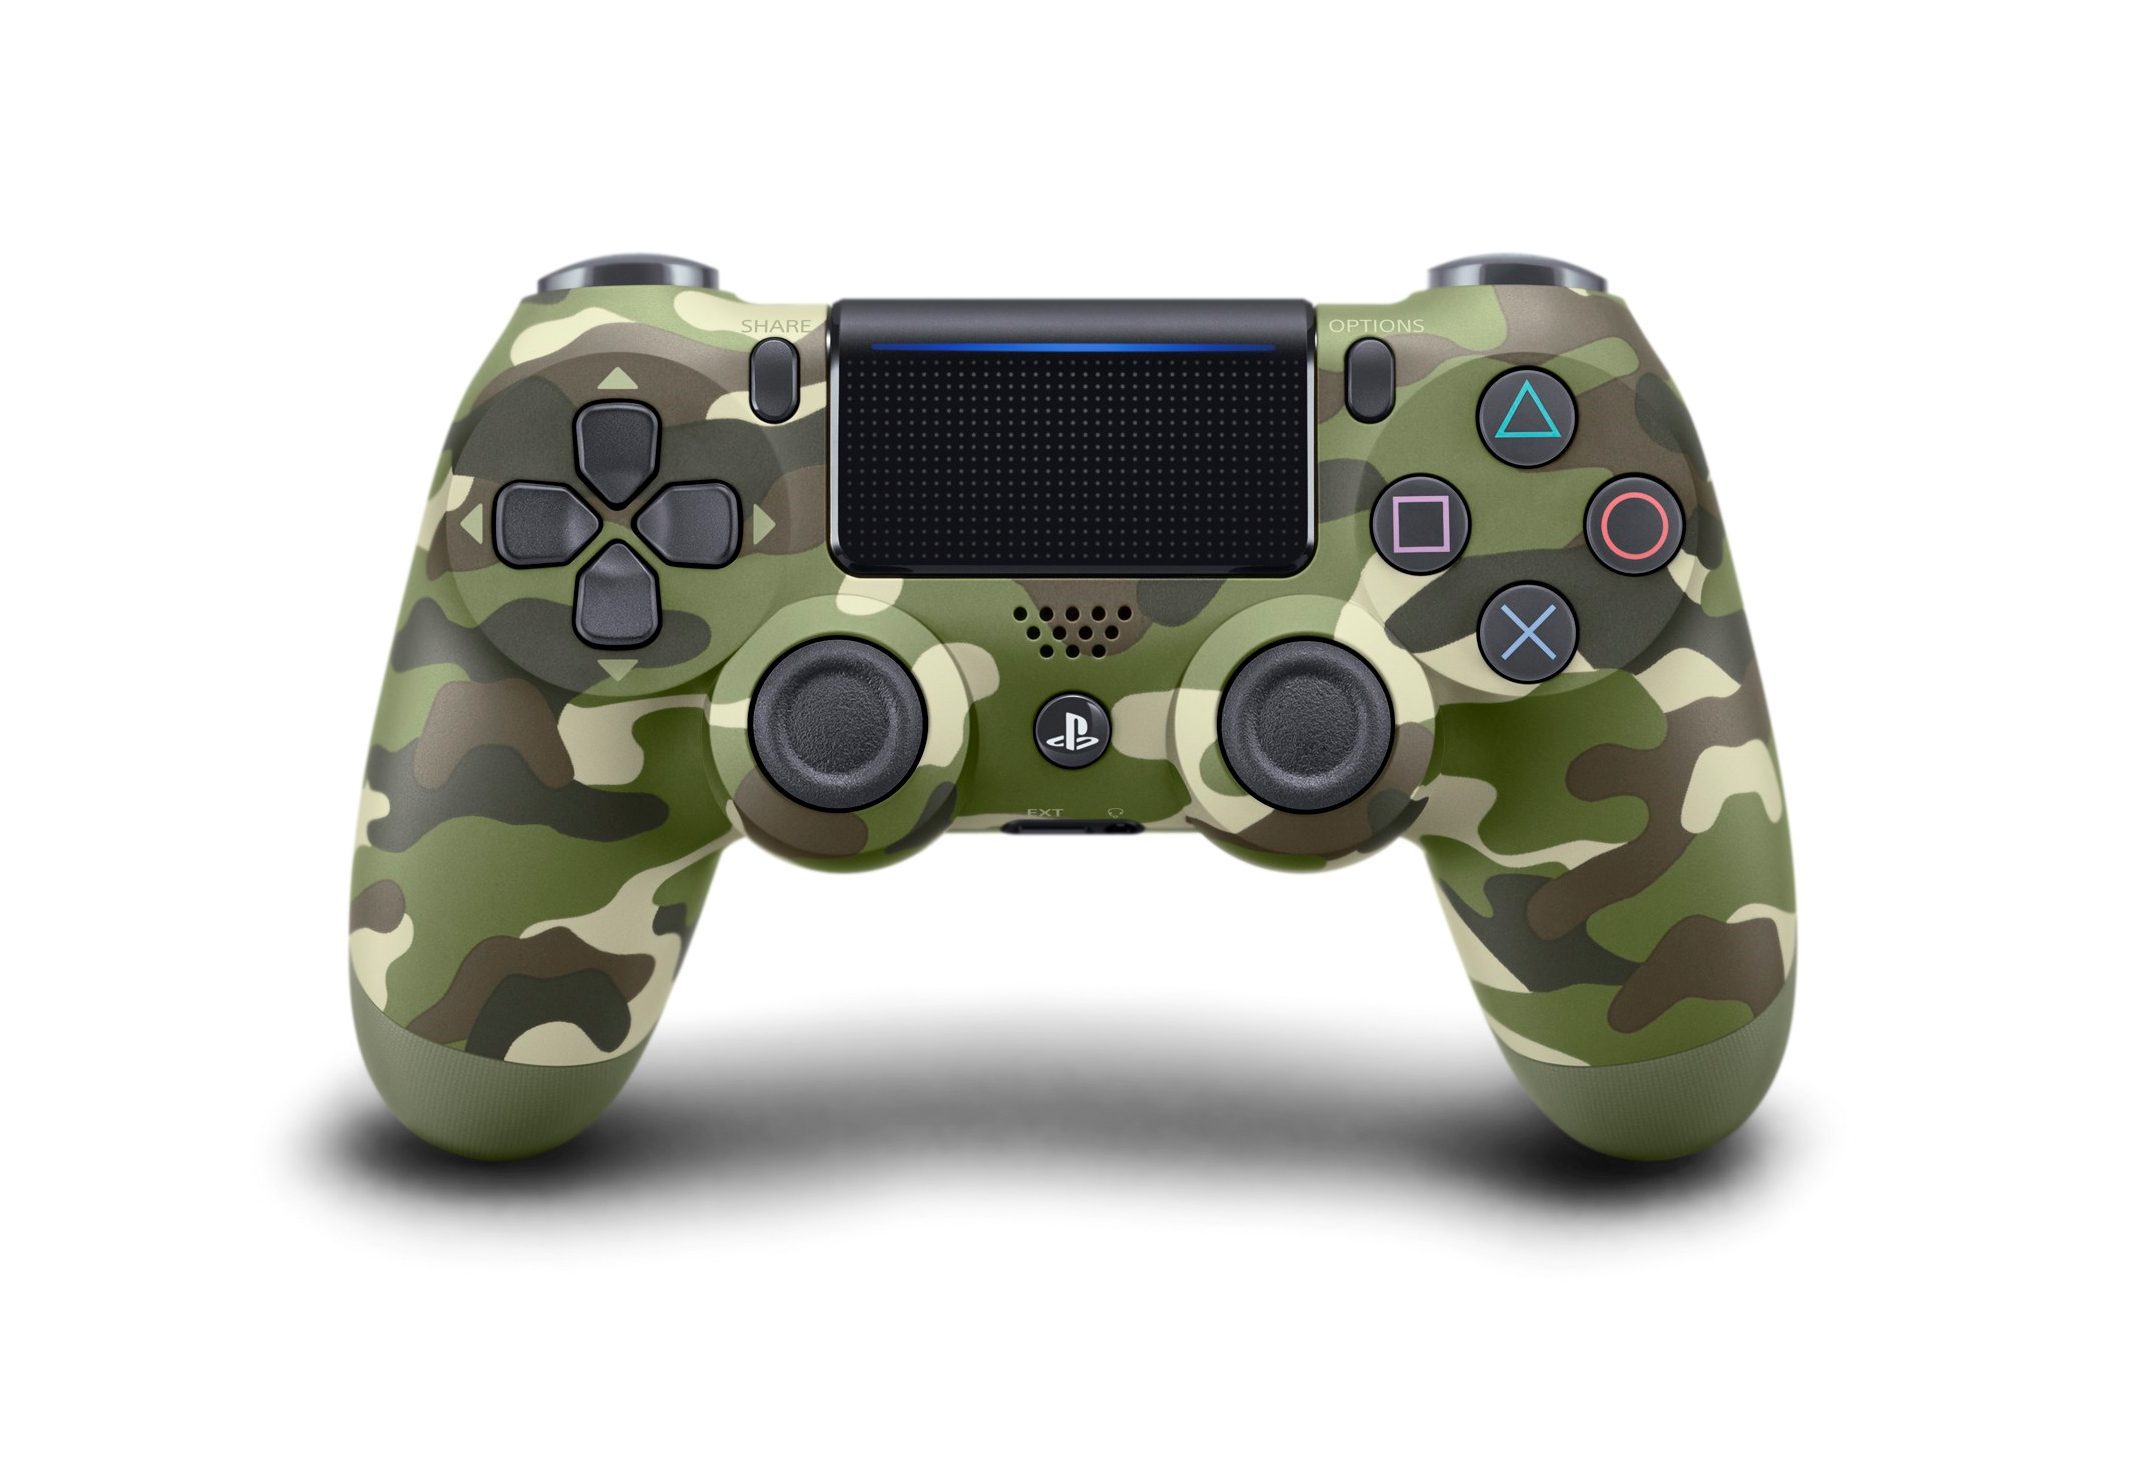 Dualshock 4 Wireless Controller for Playstation 4 PS4-Green Camouflage V2 (Pre-Owned)